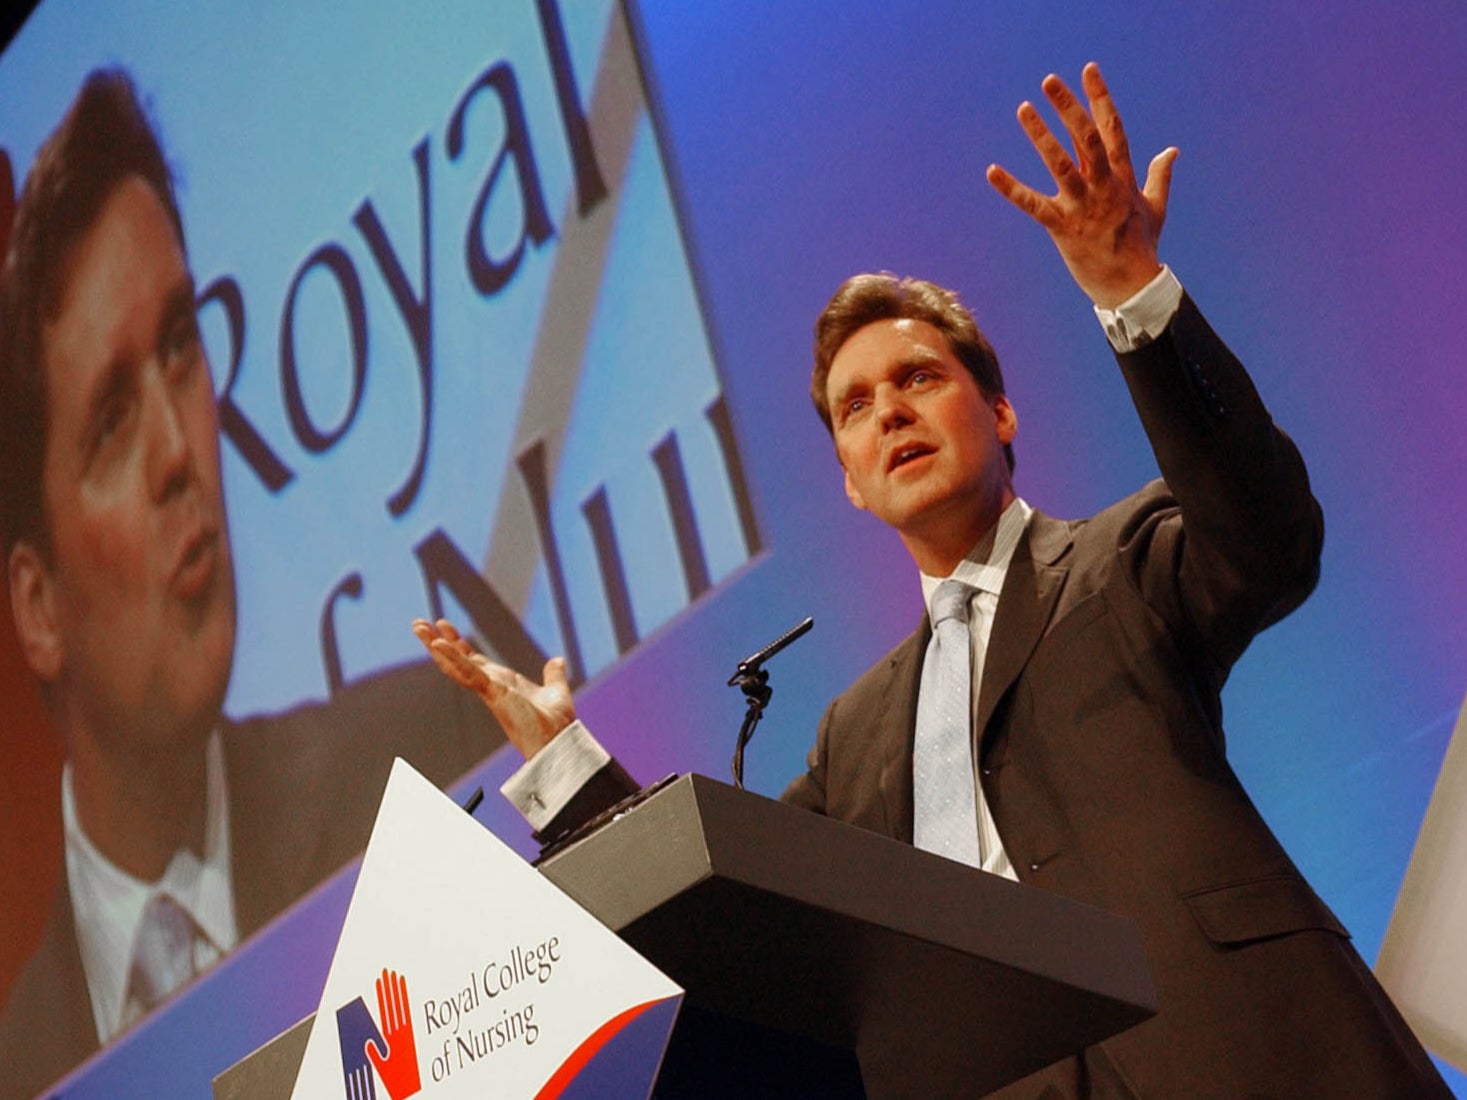 Health secretary Alan Milburn delivers his speech to the annual congress of the Royal College of Nursing in 2002